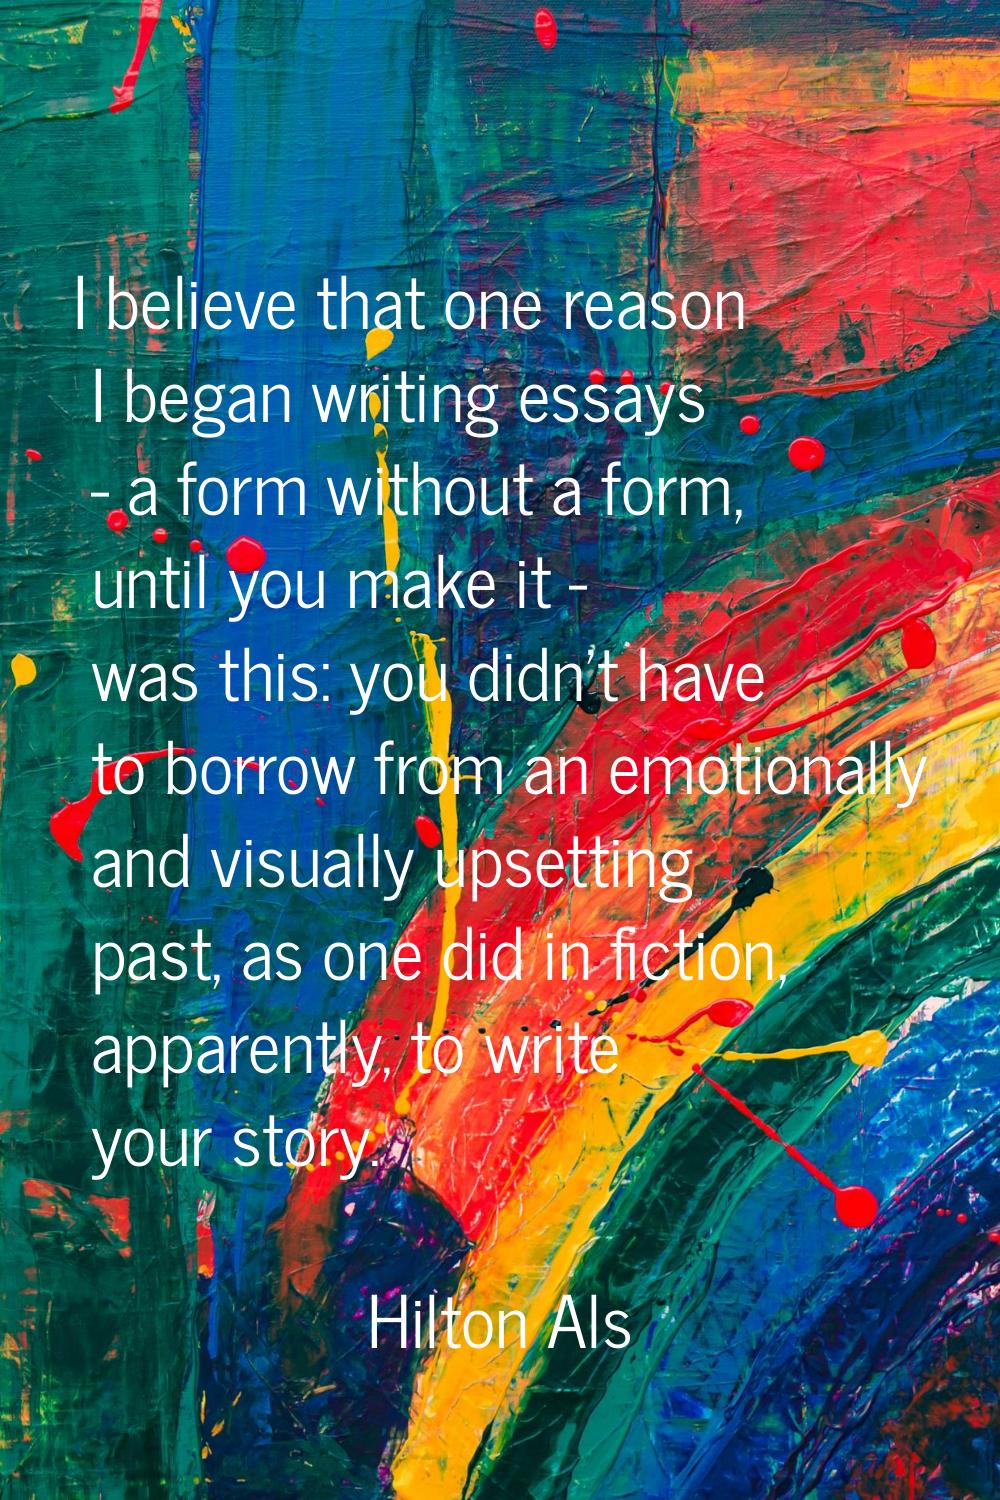 I believe that one reason I began writing essays - a form without a form, until you make it - was t